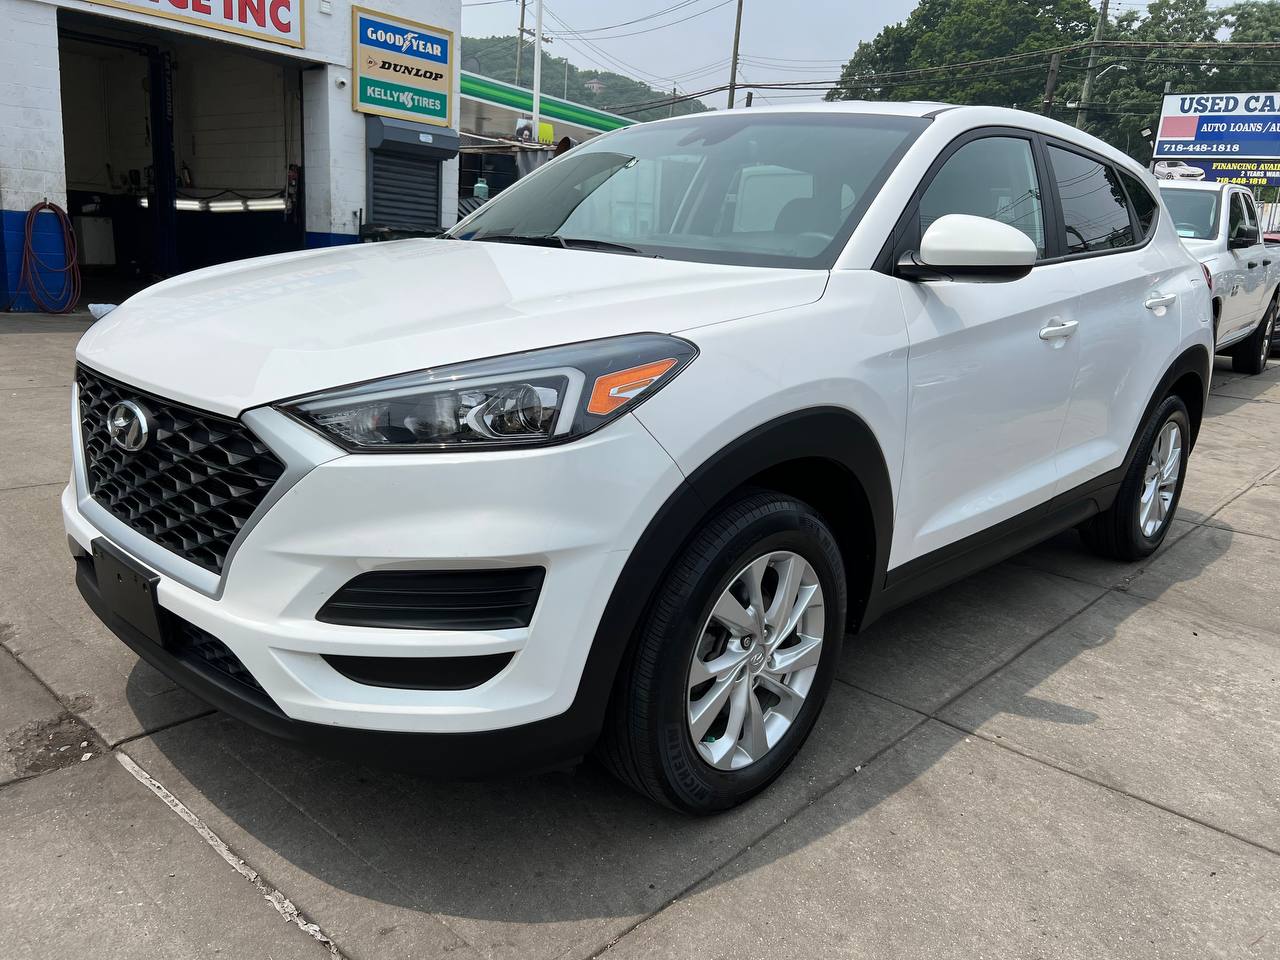 Used Car - 2020 Hyundai Tucson SE AWD for Sale in Staten Island, NY